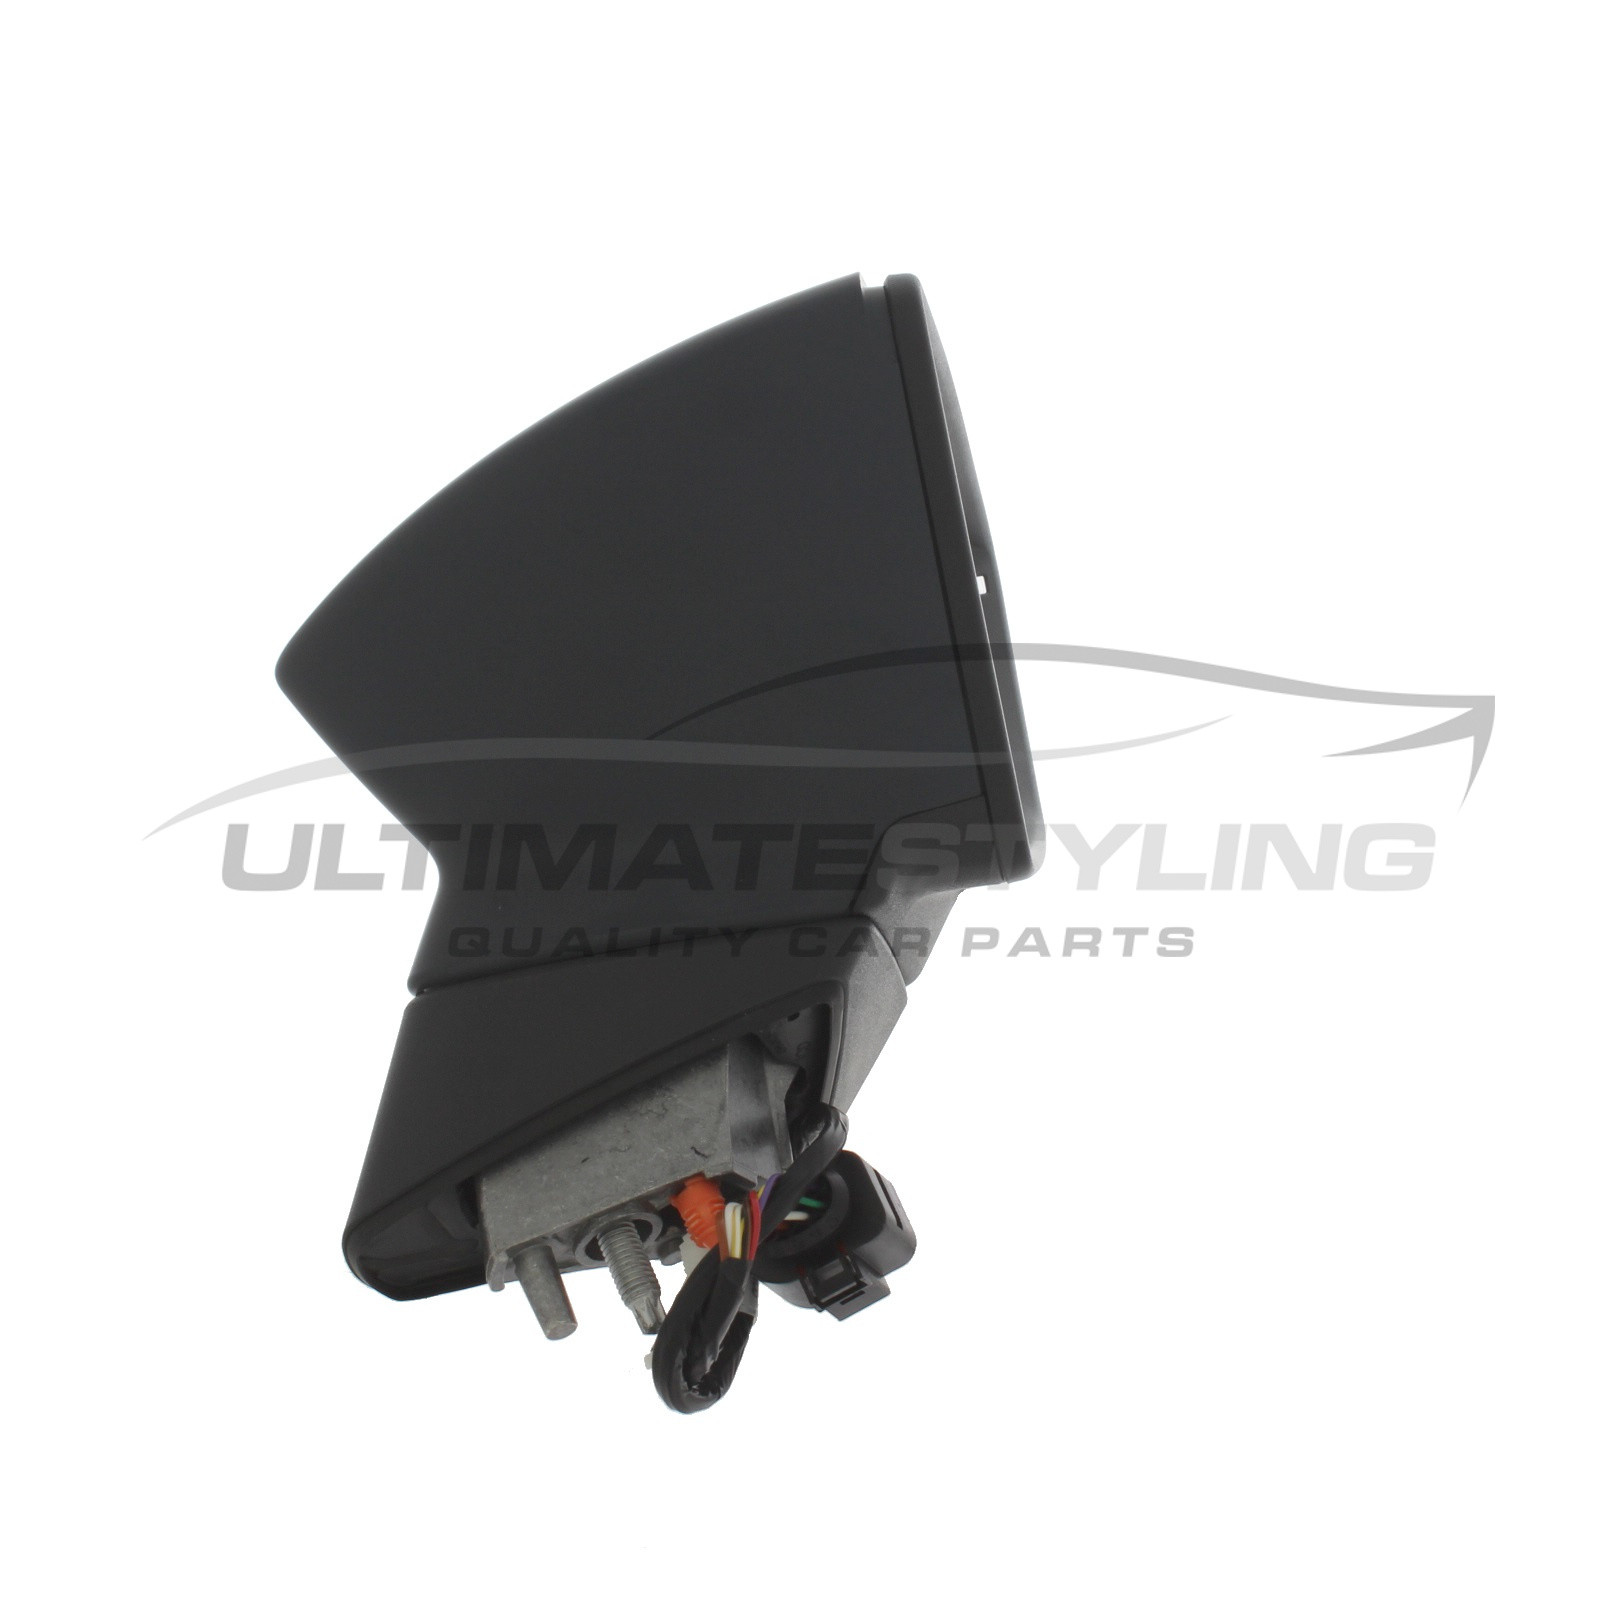 ULTIMATESTYLING ULT144-2 Manual None Power Folding Long Arm Wing Door Mirror With Non-Heated Glass With Black Mirror Cover Cap Side Of Product Drivers Side 